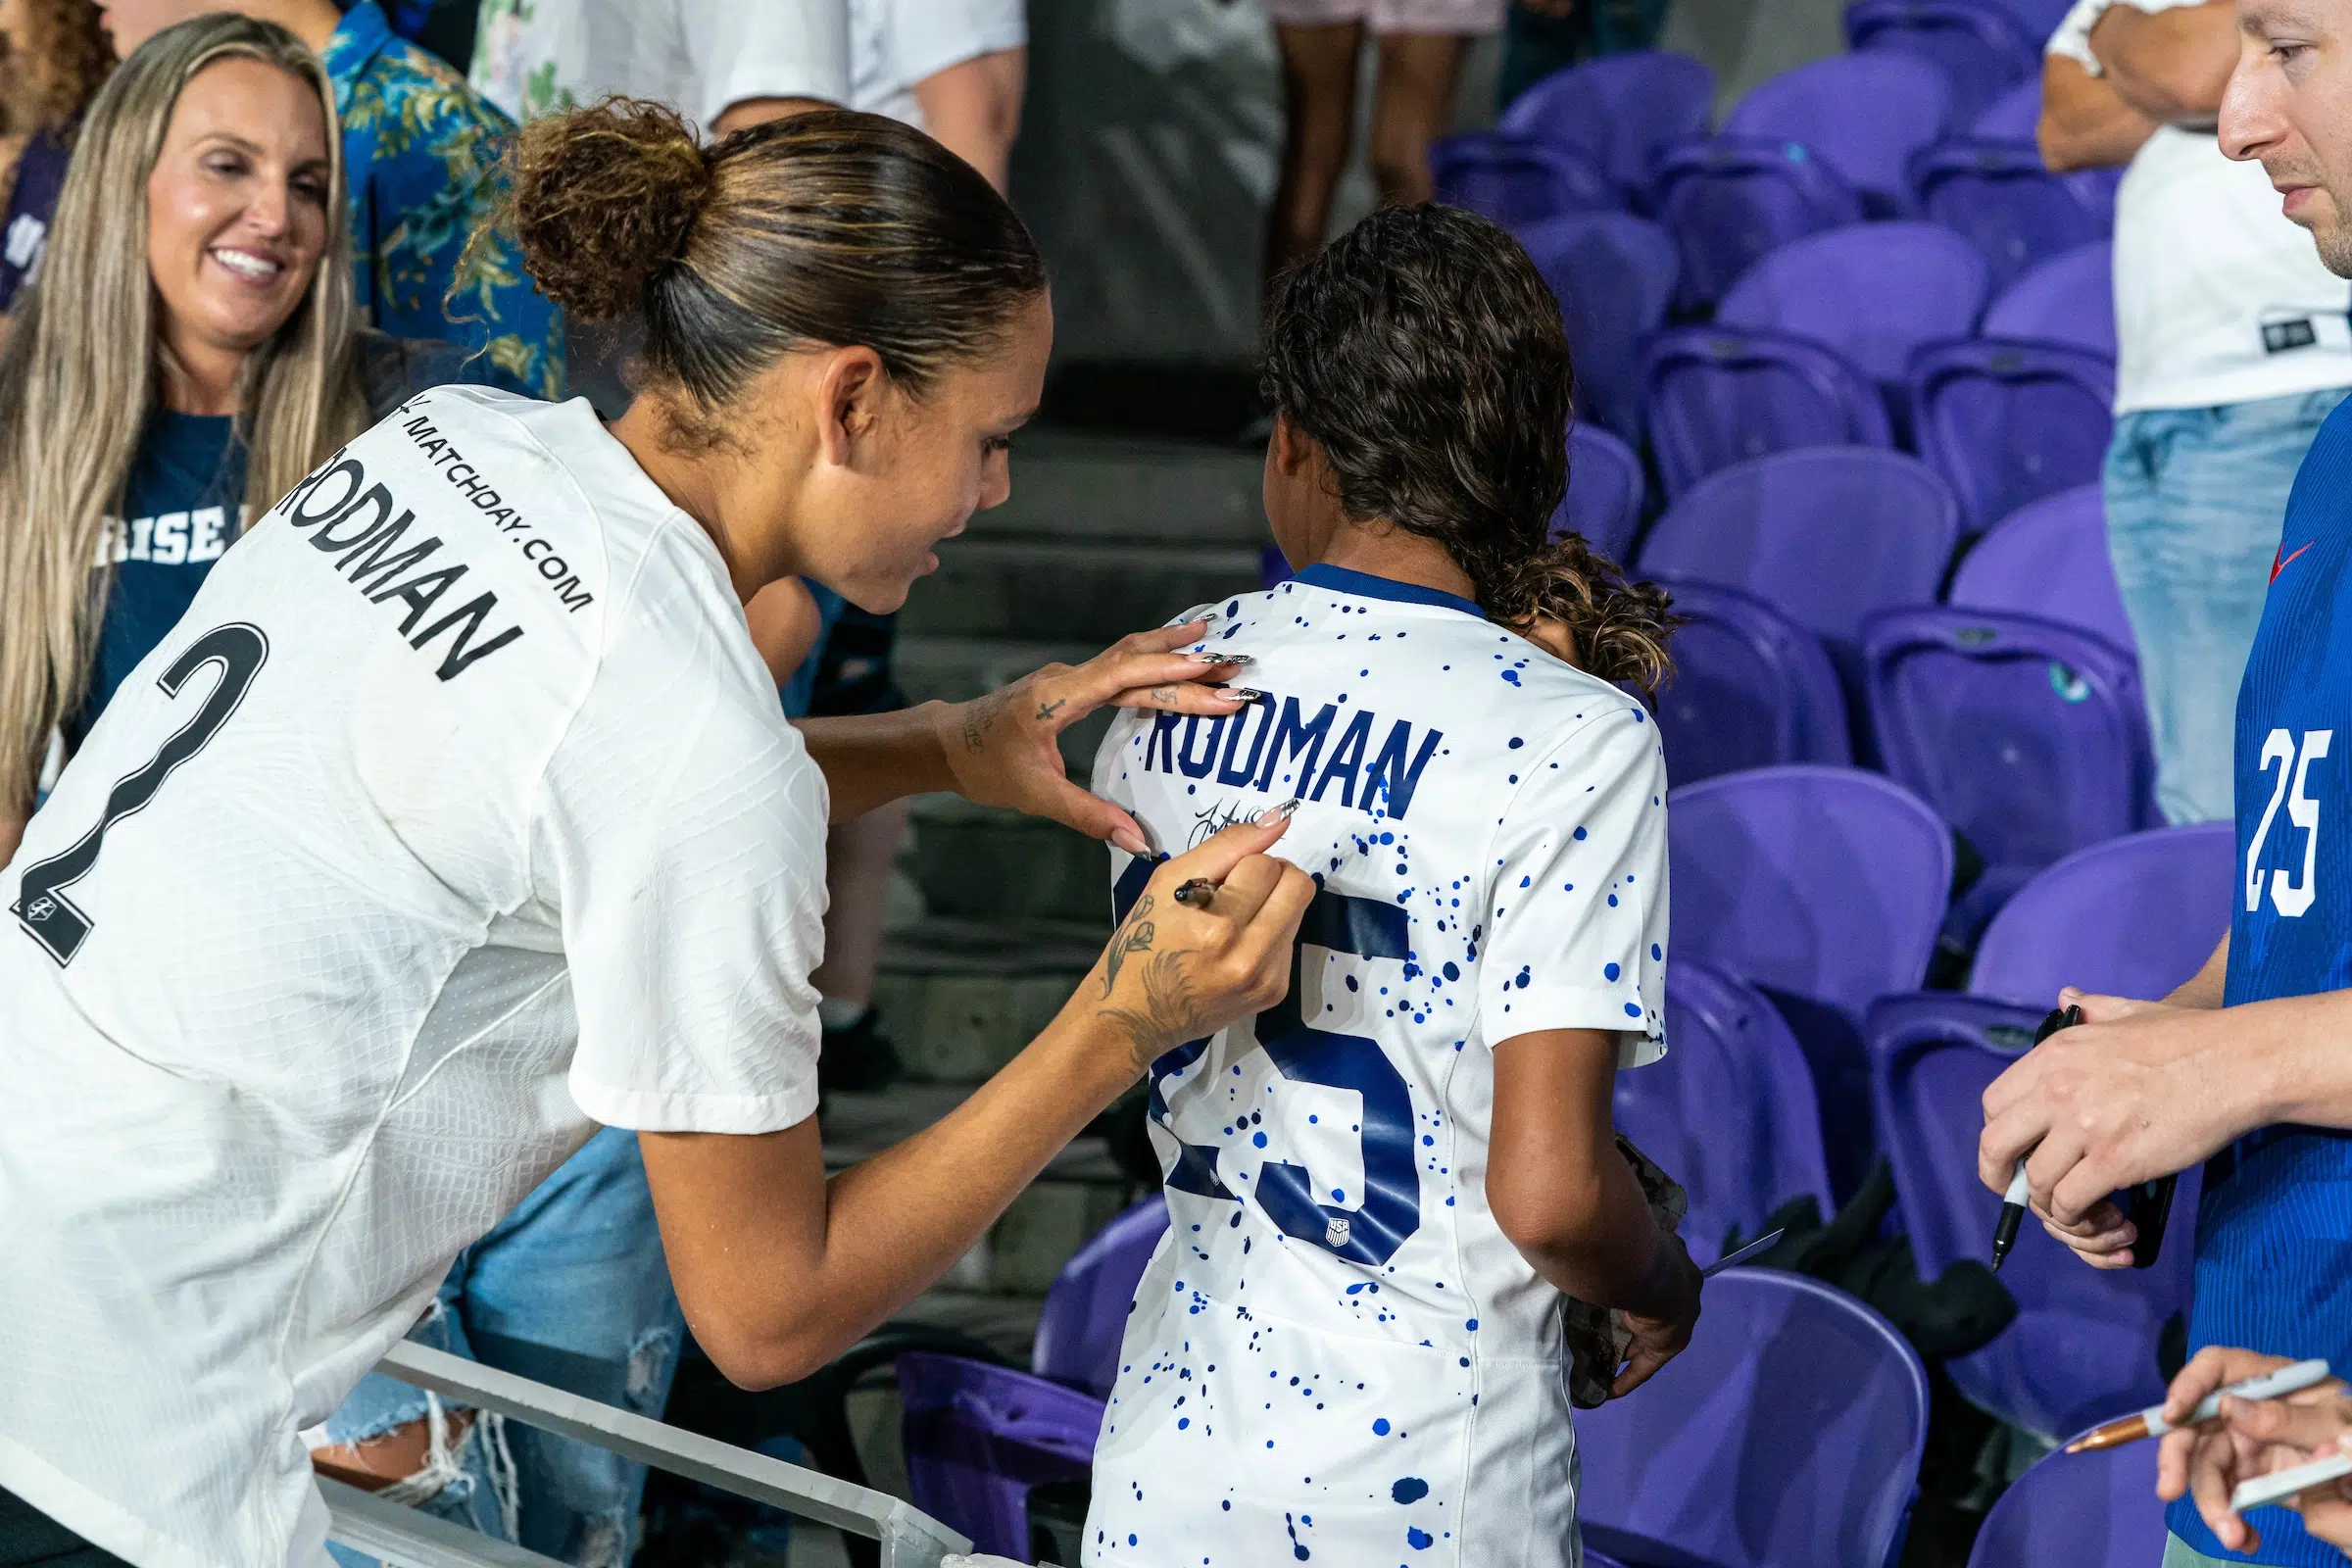 Trinity Rodman in a white top signs the back of a USWNT Rodman #25 jersey worn by a young fan.